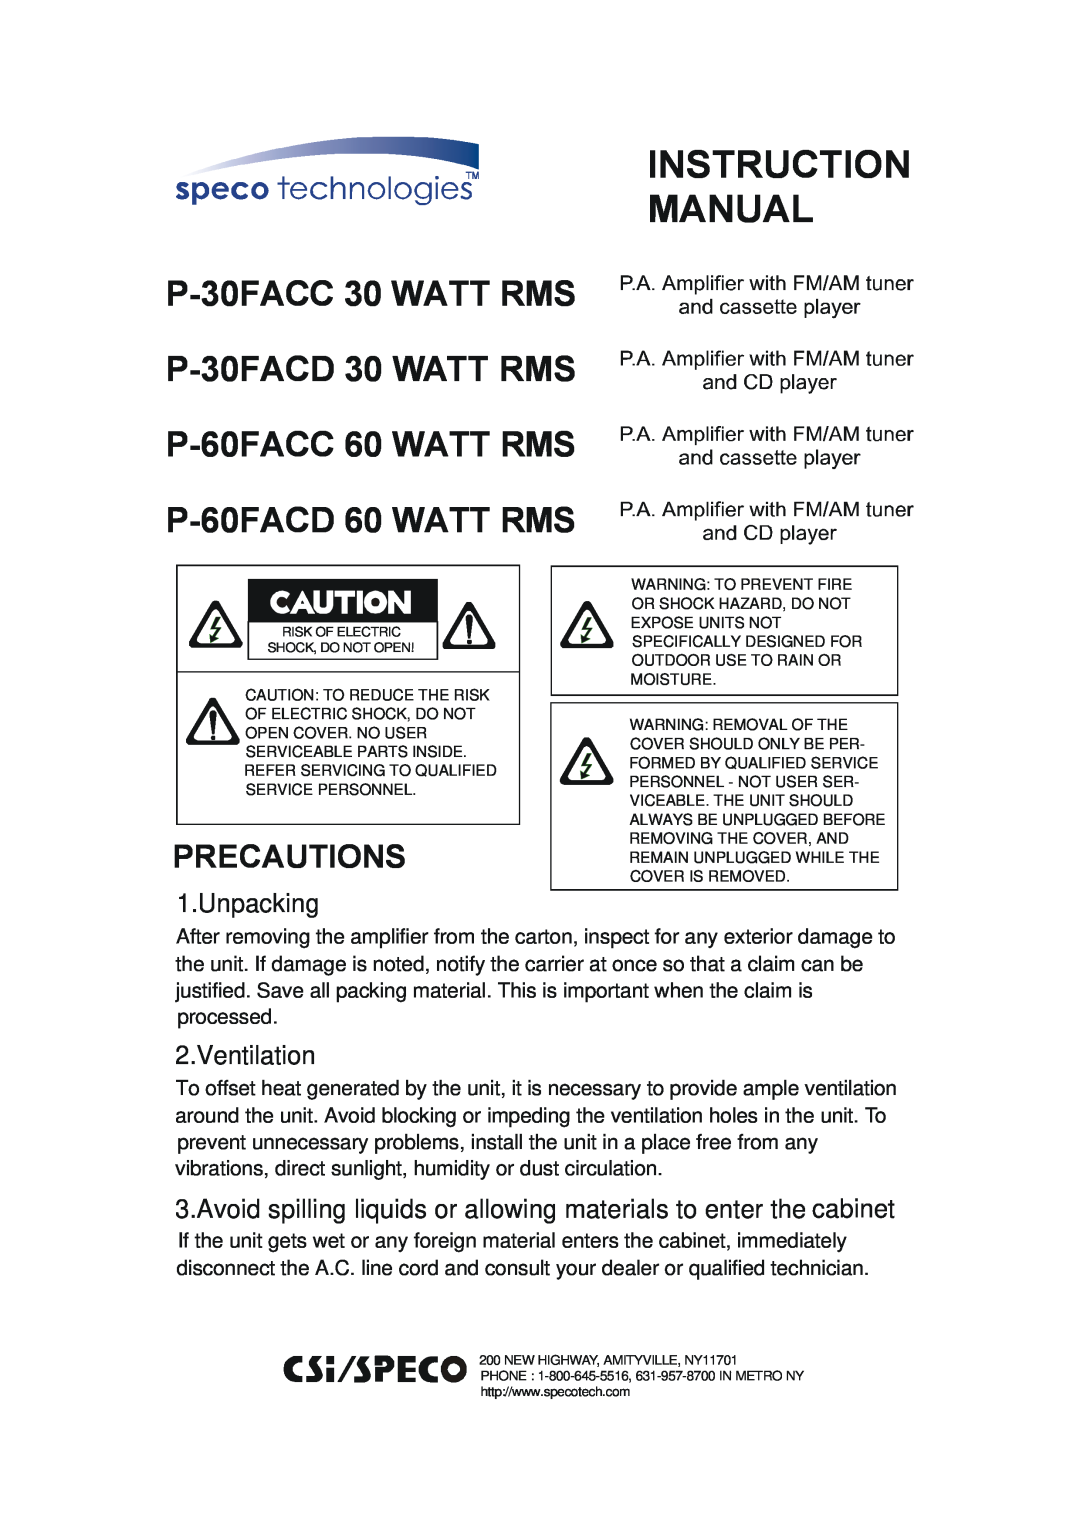 Speco Technologies instruction manual P-30FACC30 WATT RMS P-30FACD30 WATT RMS, P-60FACC60 WATT RMS P-60FACD60 WATT RMS 